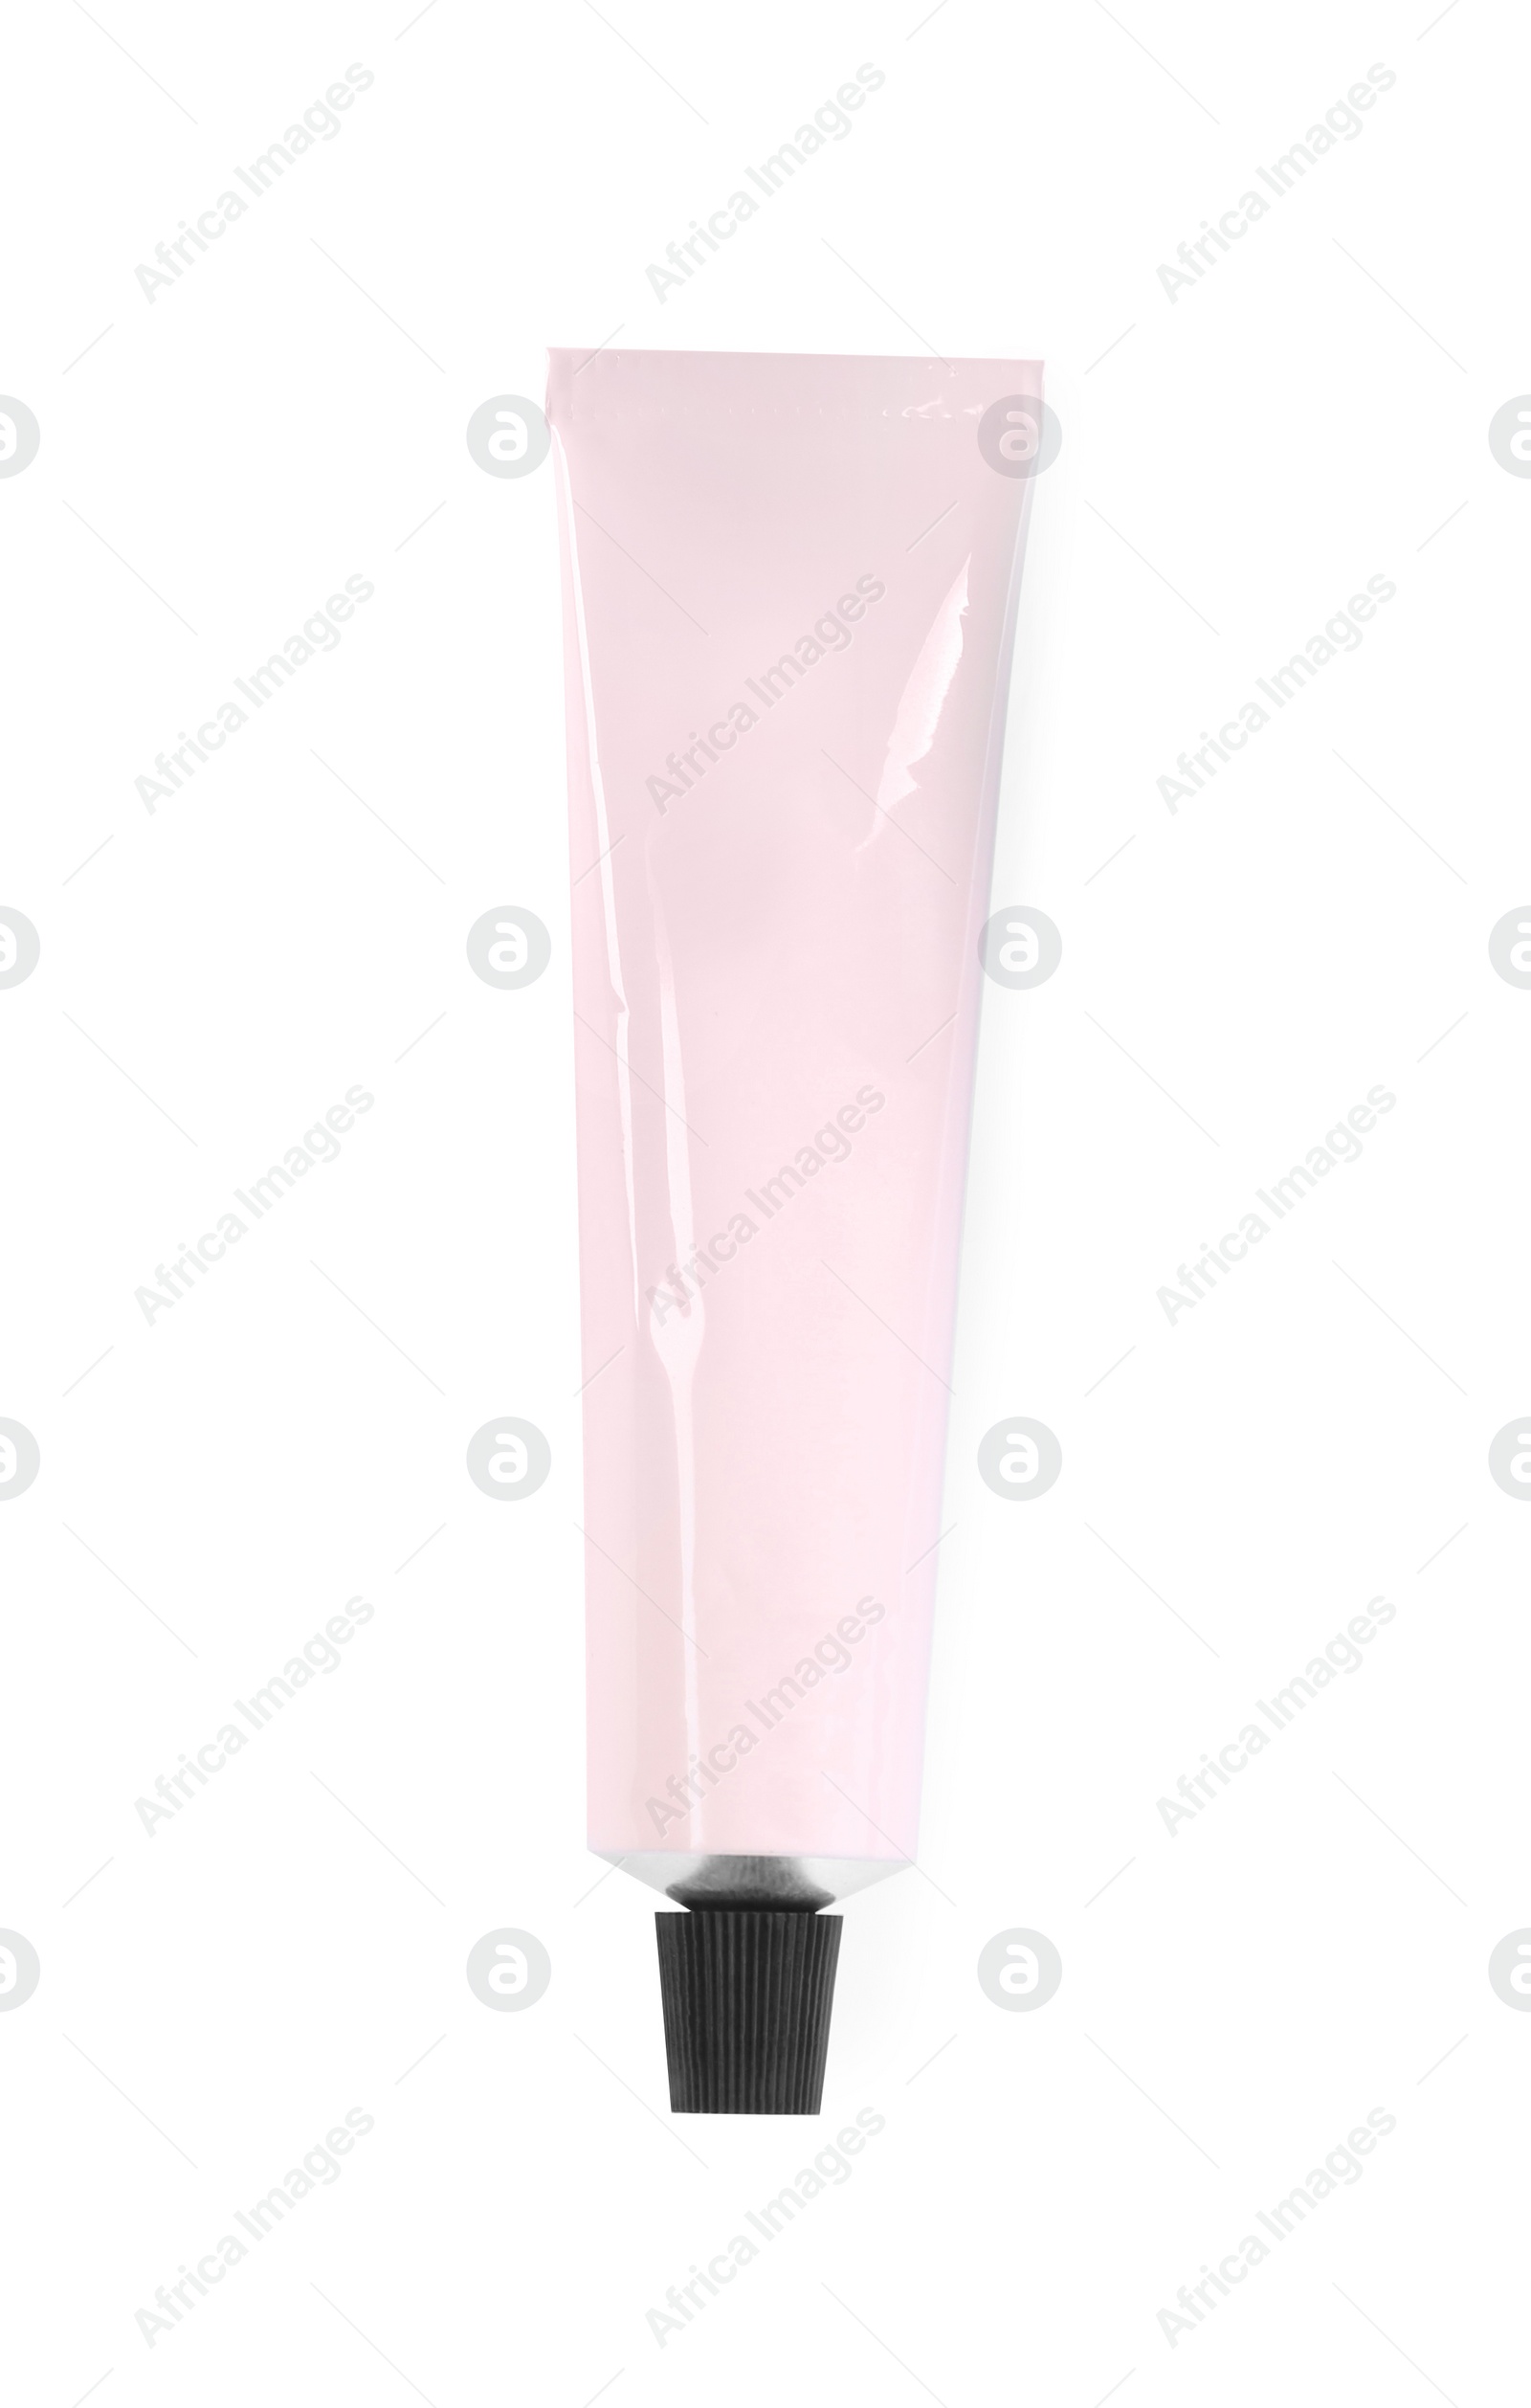 Photo of Tube of hand cream isolated on white, top view